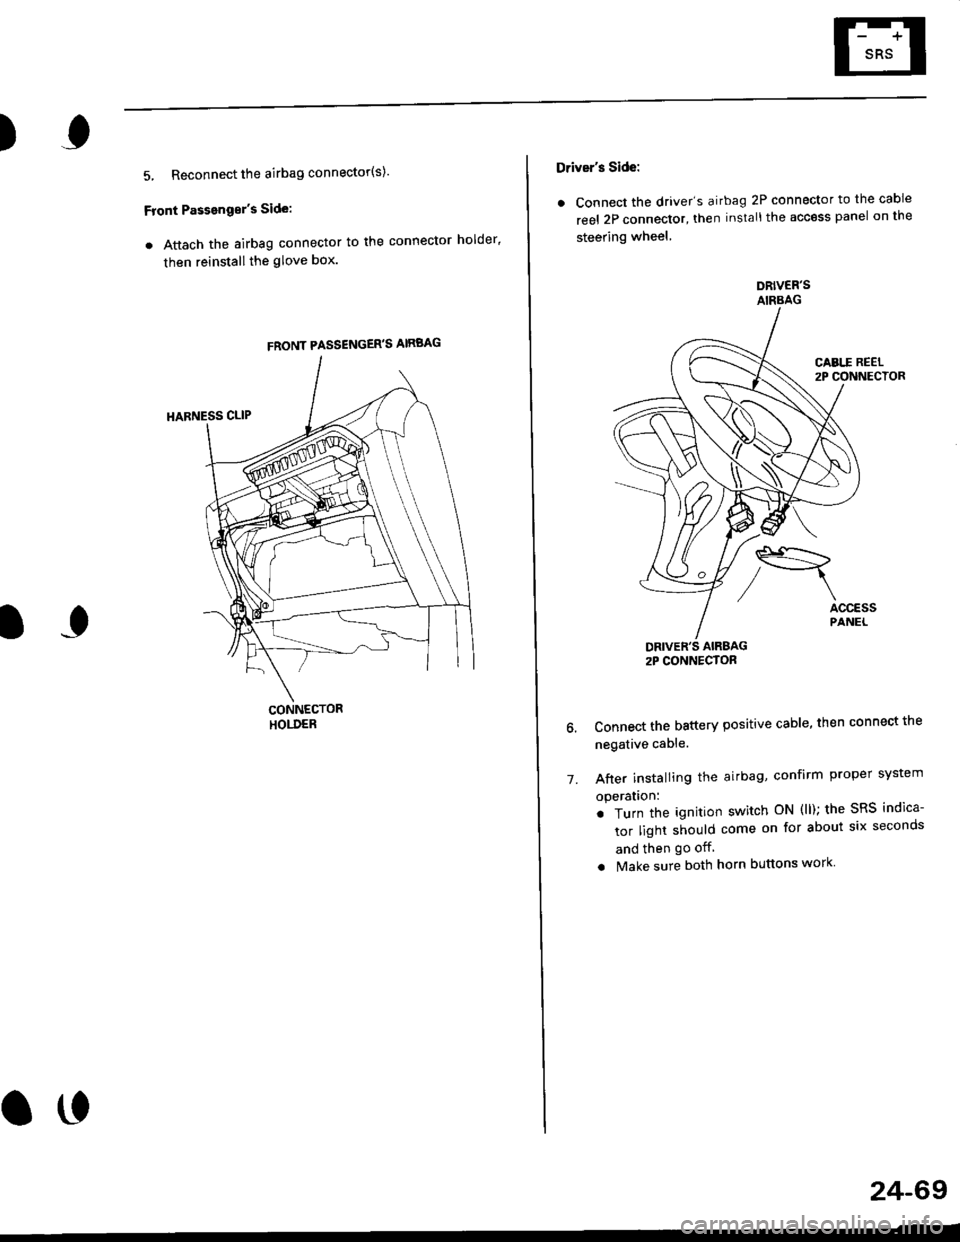 HONDA CIVIC 1997 6.G Workshop Manual )
5, Reconnect the airbag connector(s)
Front Passengors Side:
a Attach the airbag connector to the connector holder
then reinstallthe glove box.
FRONT PASSENGERS AIRBAG
oo
24-69
Drivers Side:
a C